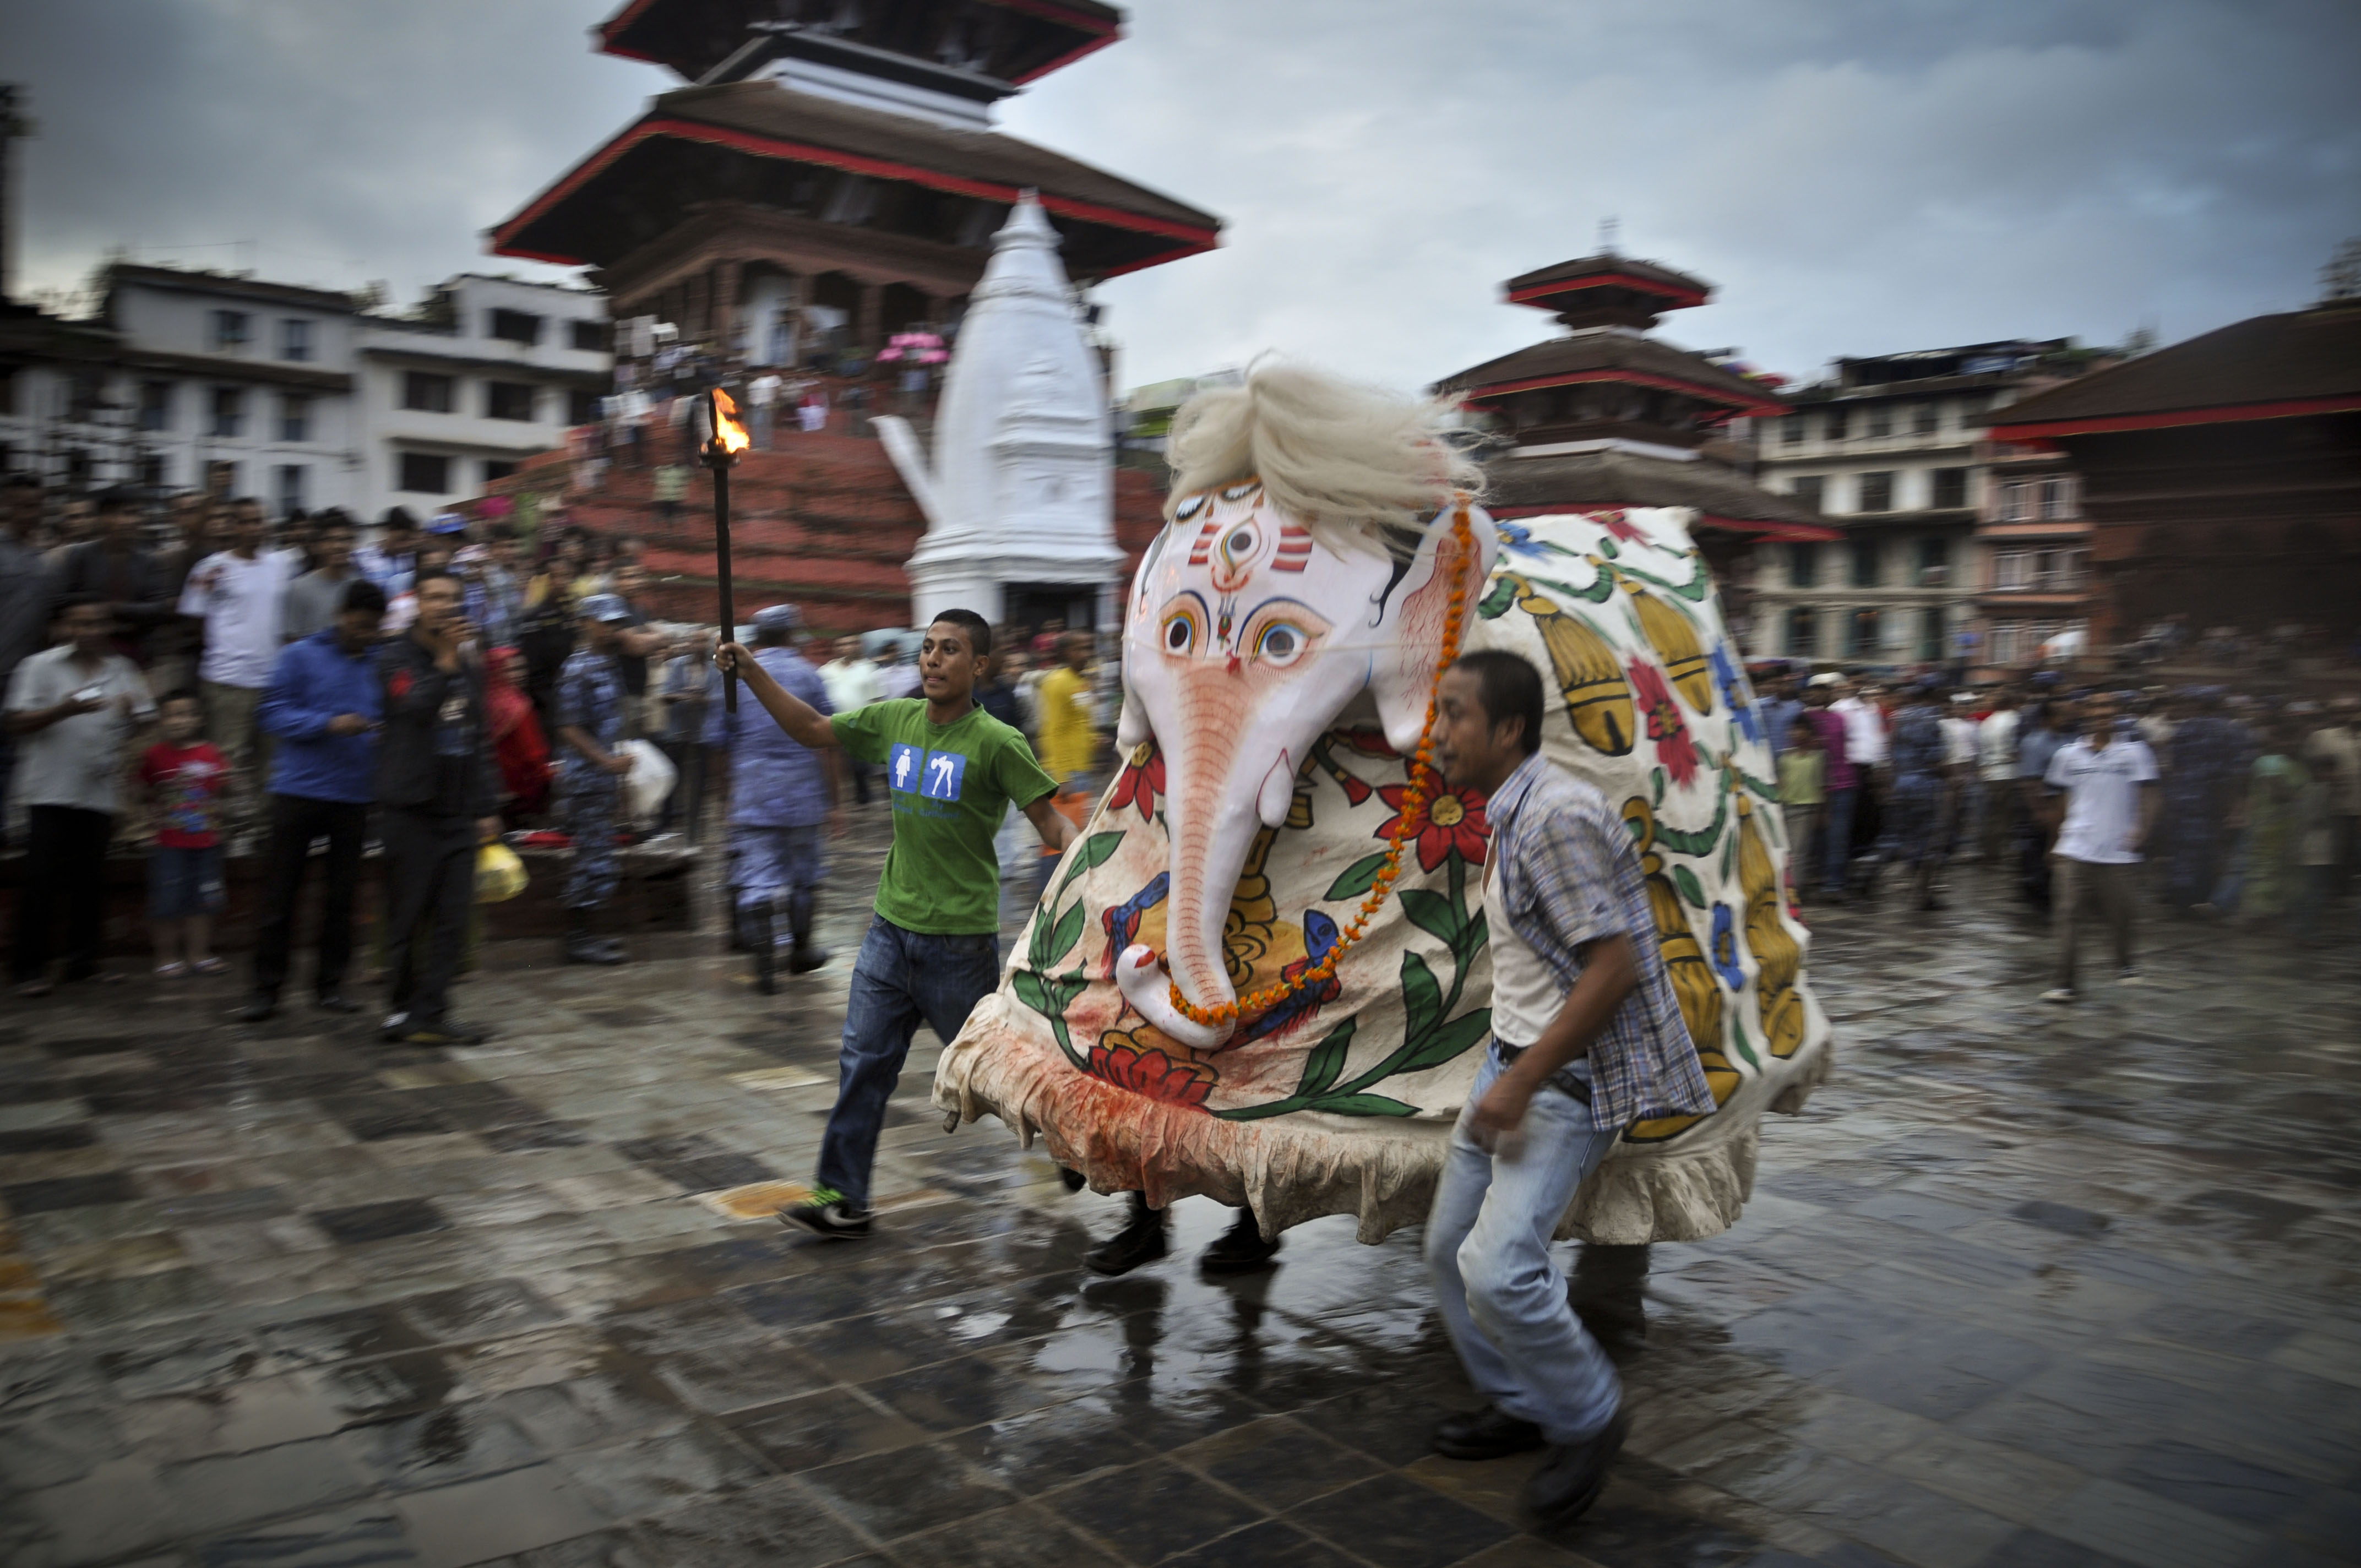 Experience Nepal in full circle